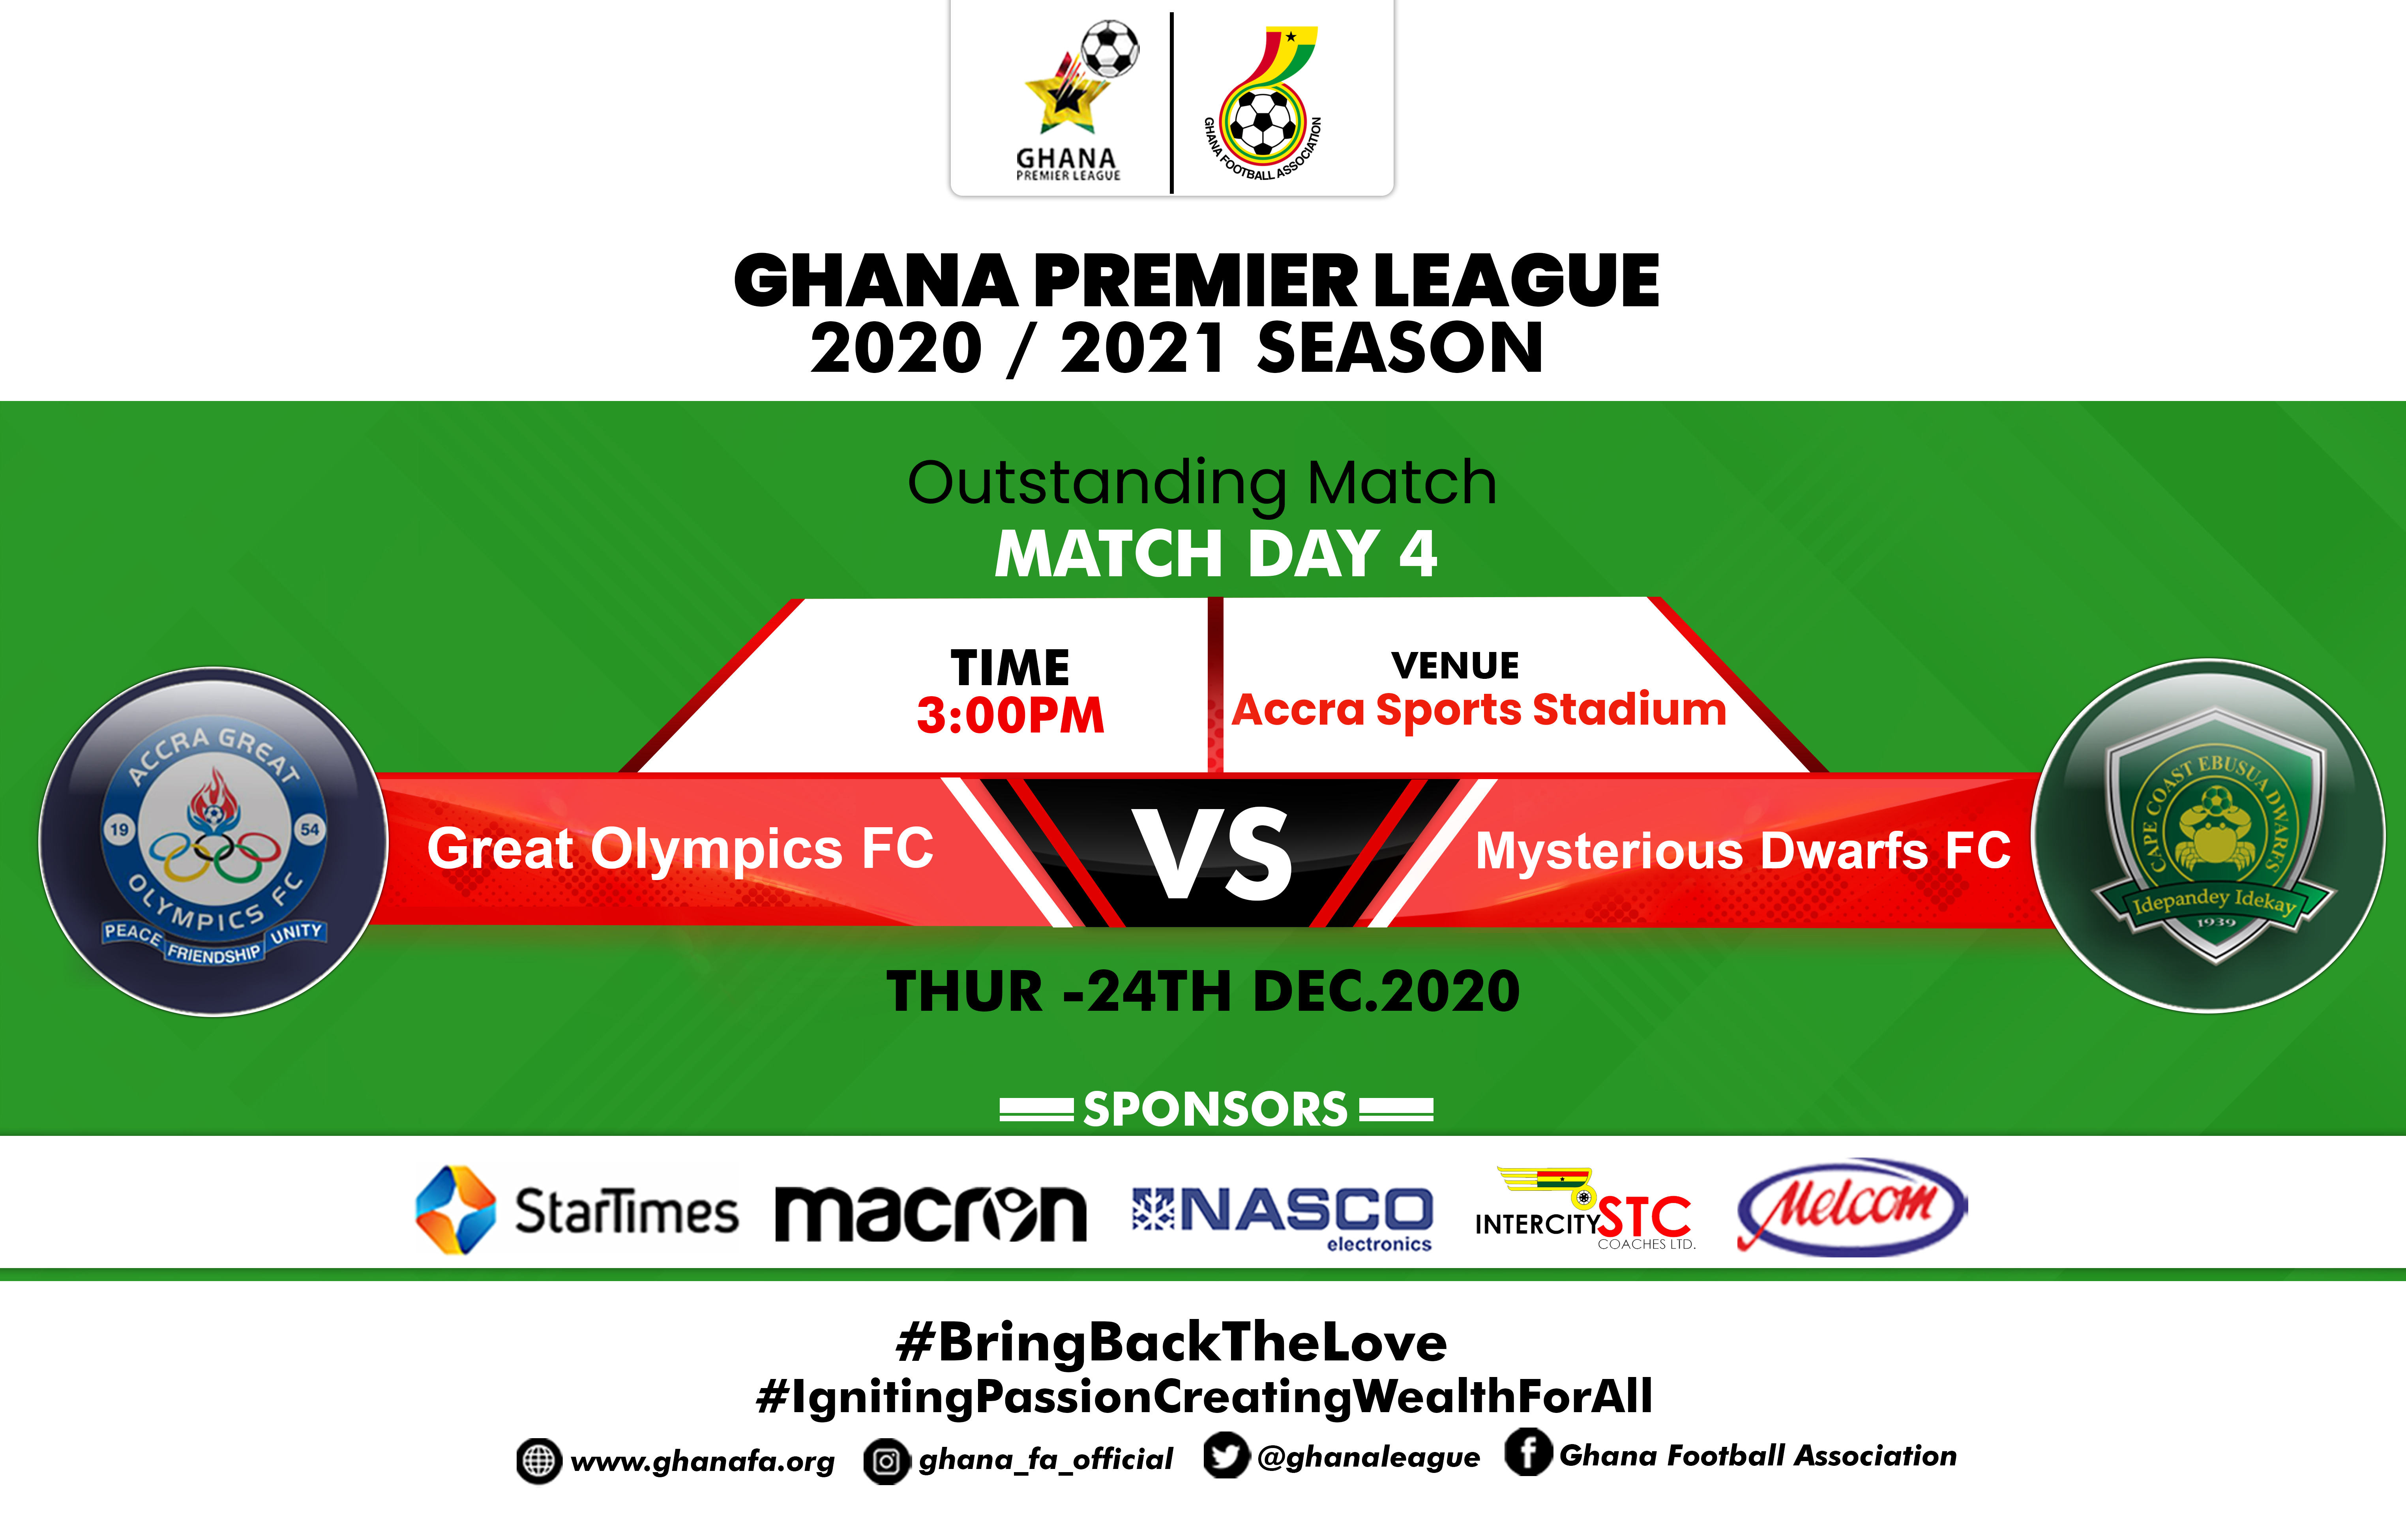 Outstanding match between Great Olympics & Ebusua Dwarfs to be played on Thursday